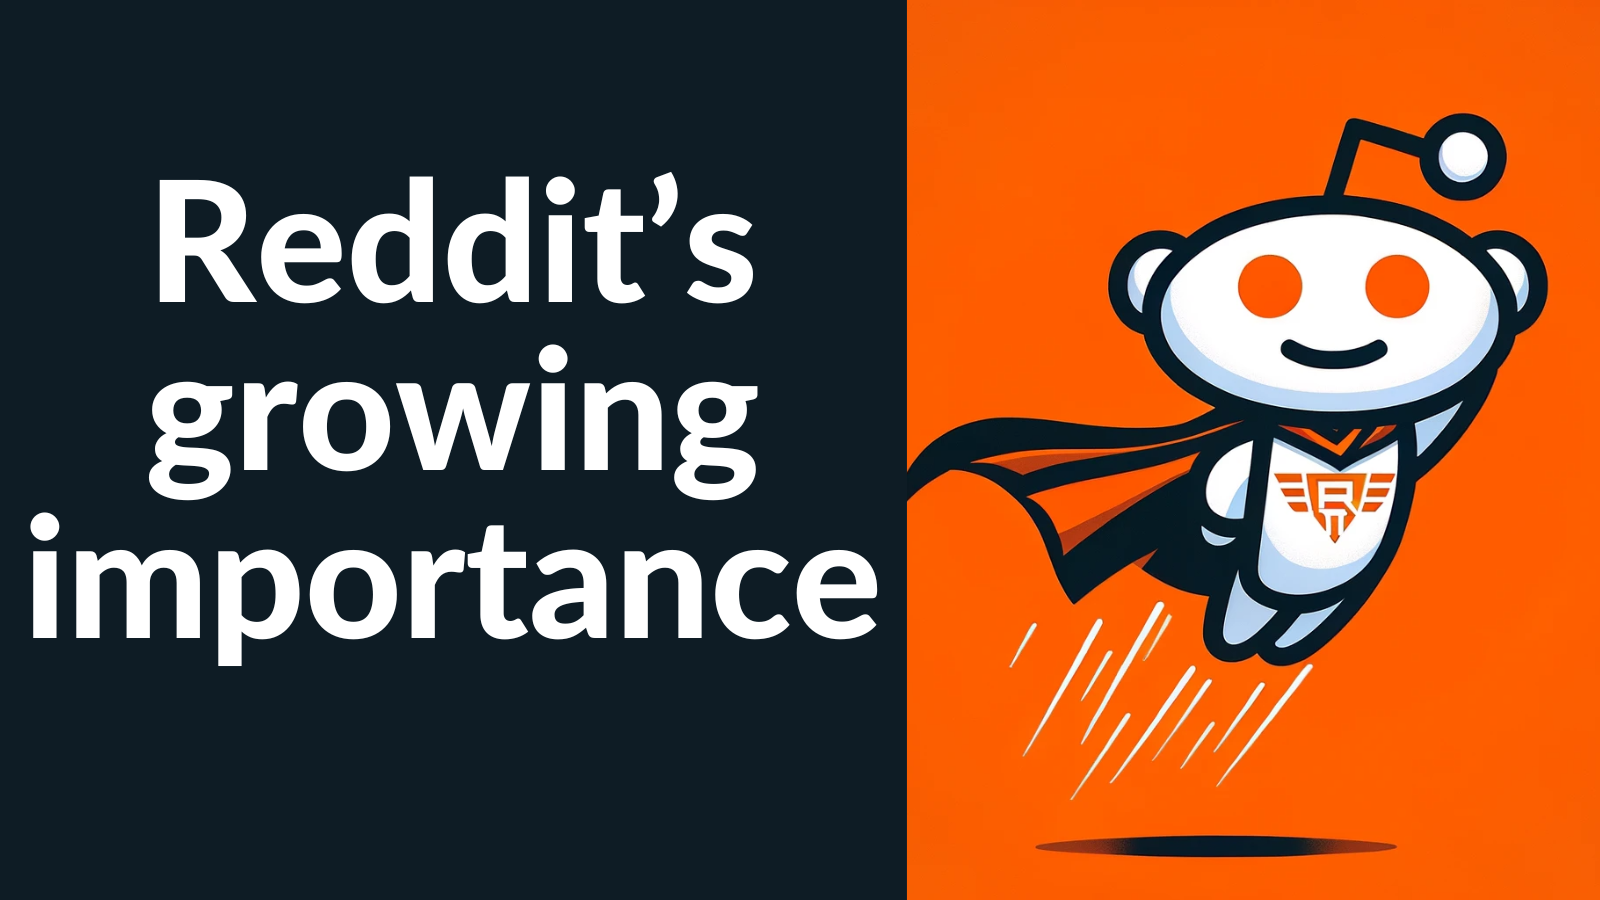 Reddit’s growth in Google search is an opportunity for cross division